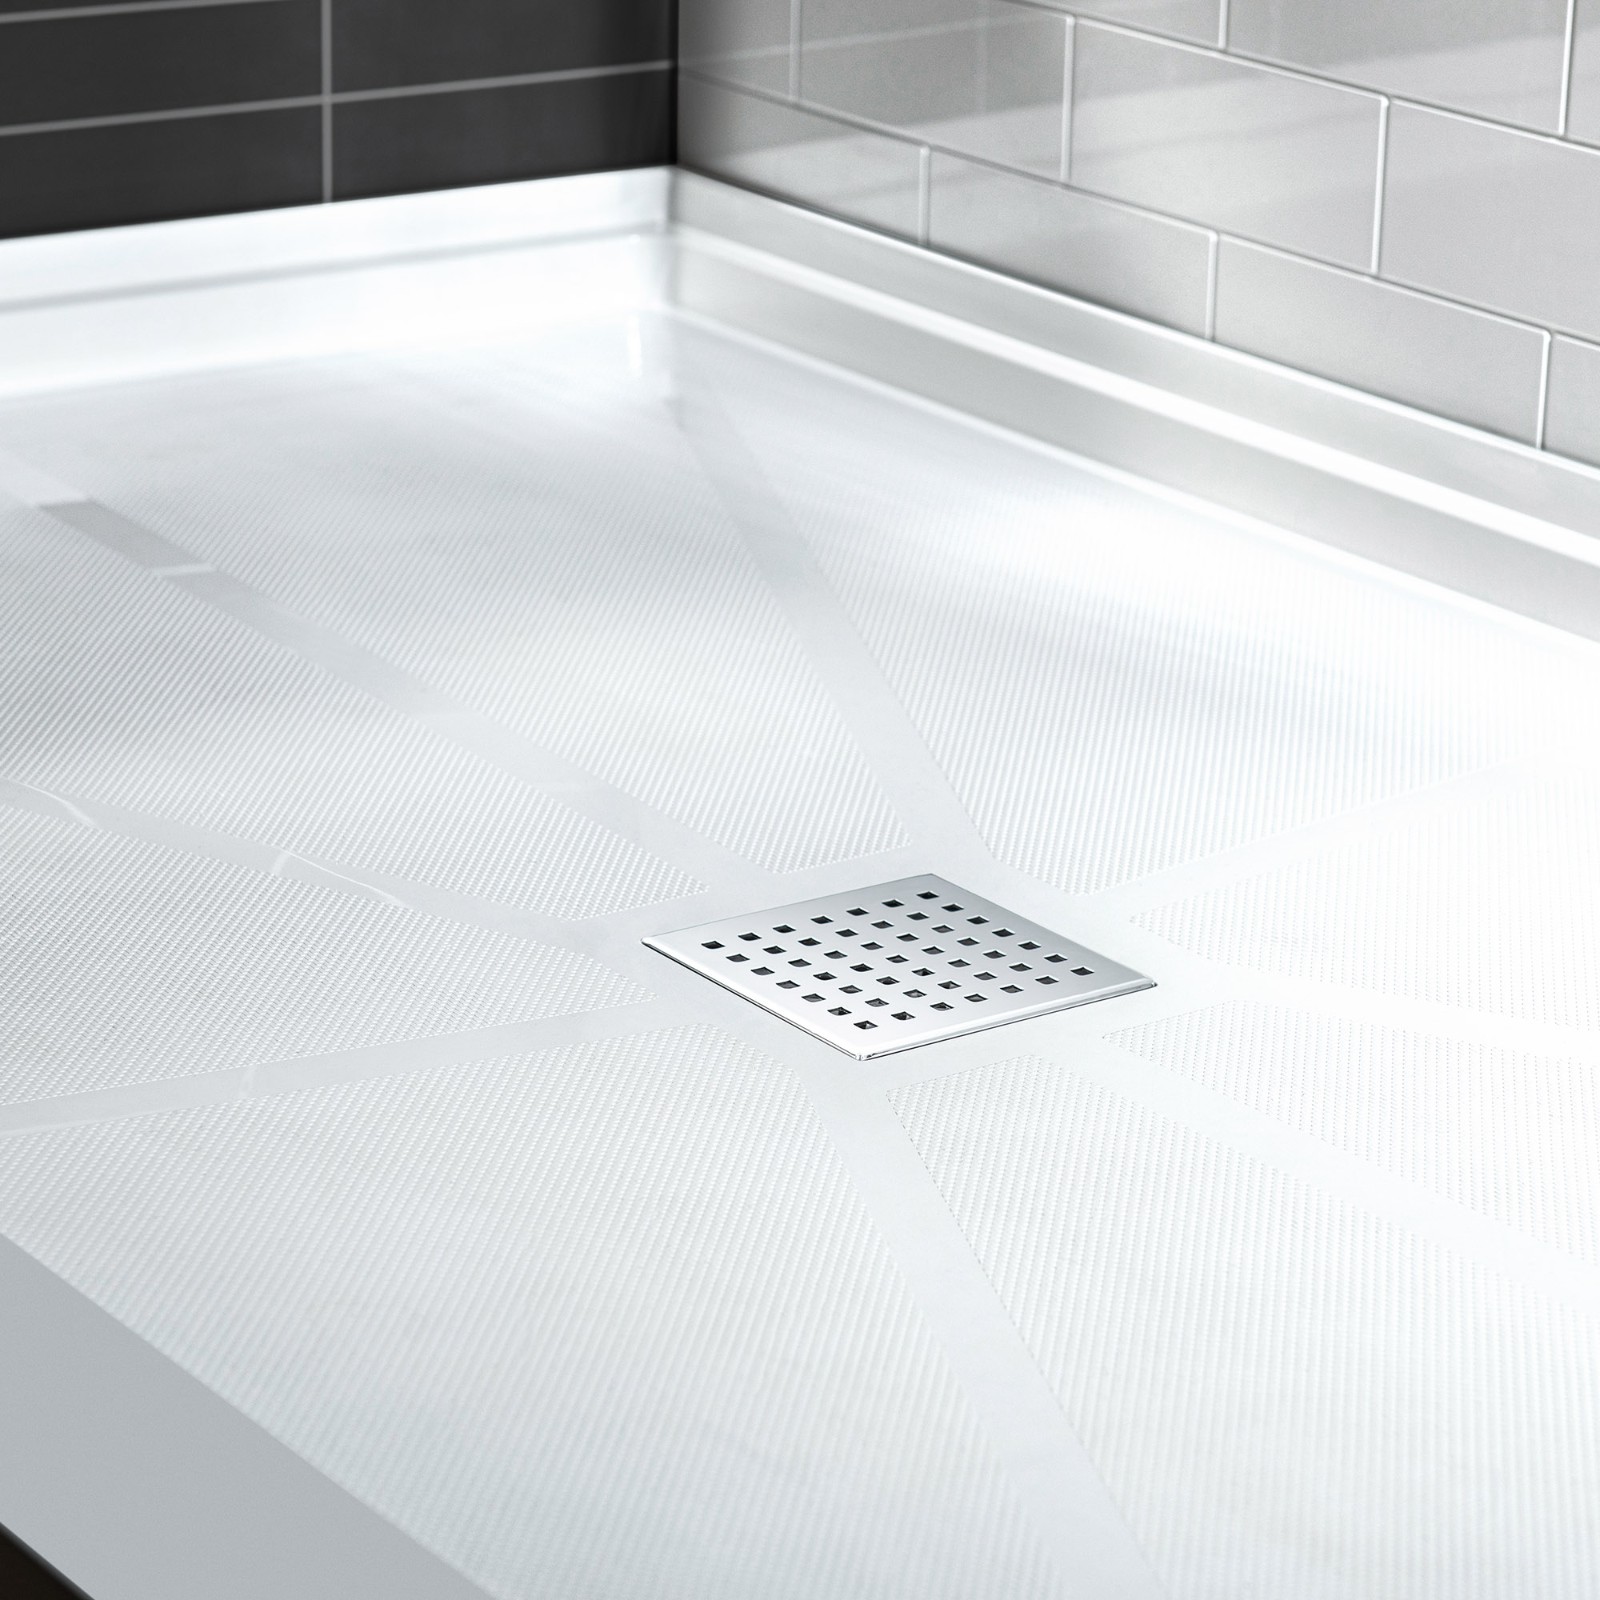  WOODBRIDGE SBR6032-1000C-CH SolidSurface Shower Base with Recessed Trench Side Including  Chrome Linear Cover, 60